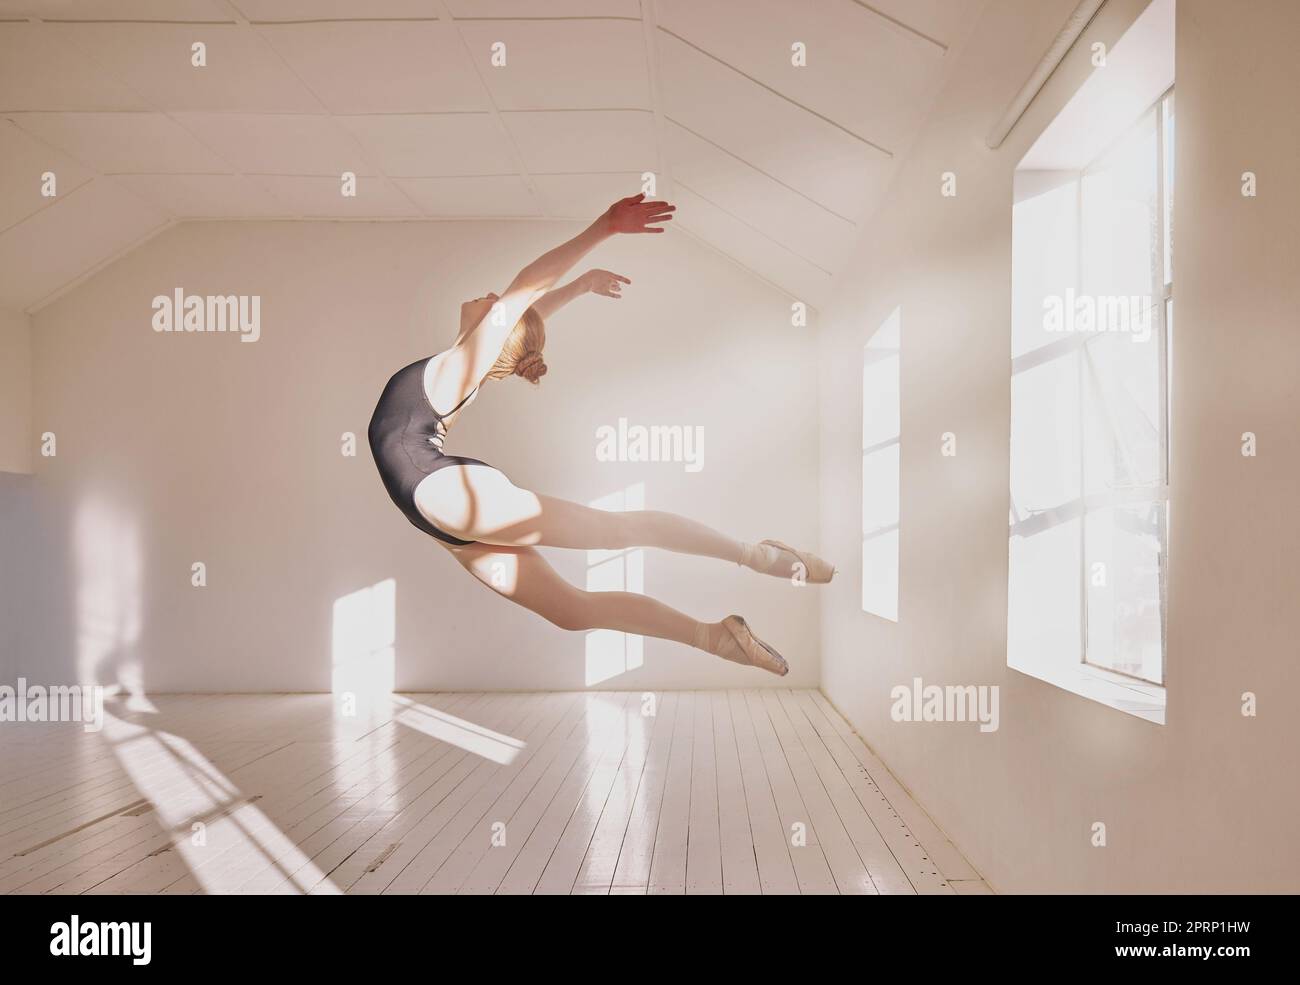 Woman ballet dancer dancing in a dance studio mockup white walls and sunlight. Young professional girl, art or sports student jumping mid air technique in a creative ballerina class Stock Photo